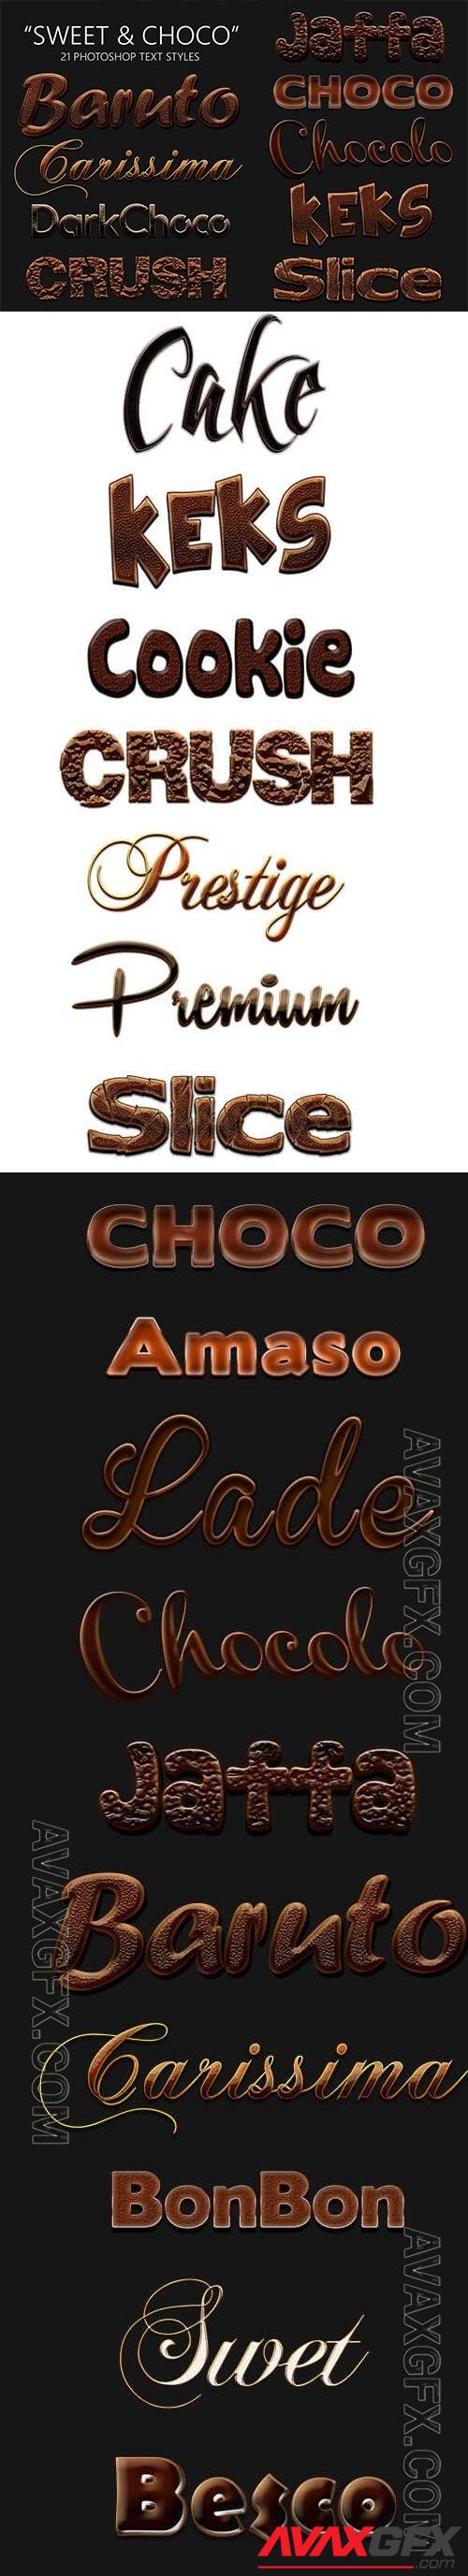 Sweet and Choco 21 Photoshop Styles Psd